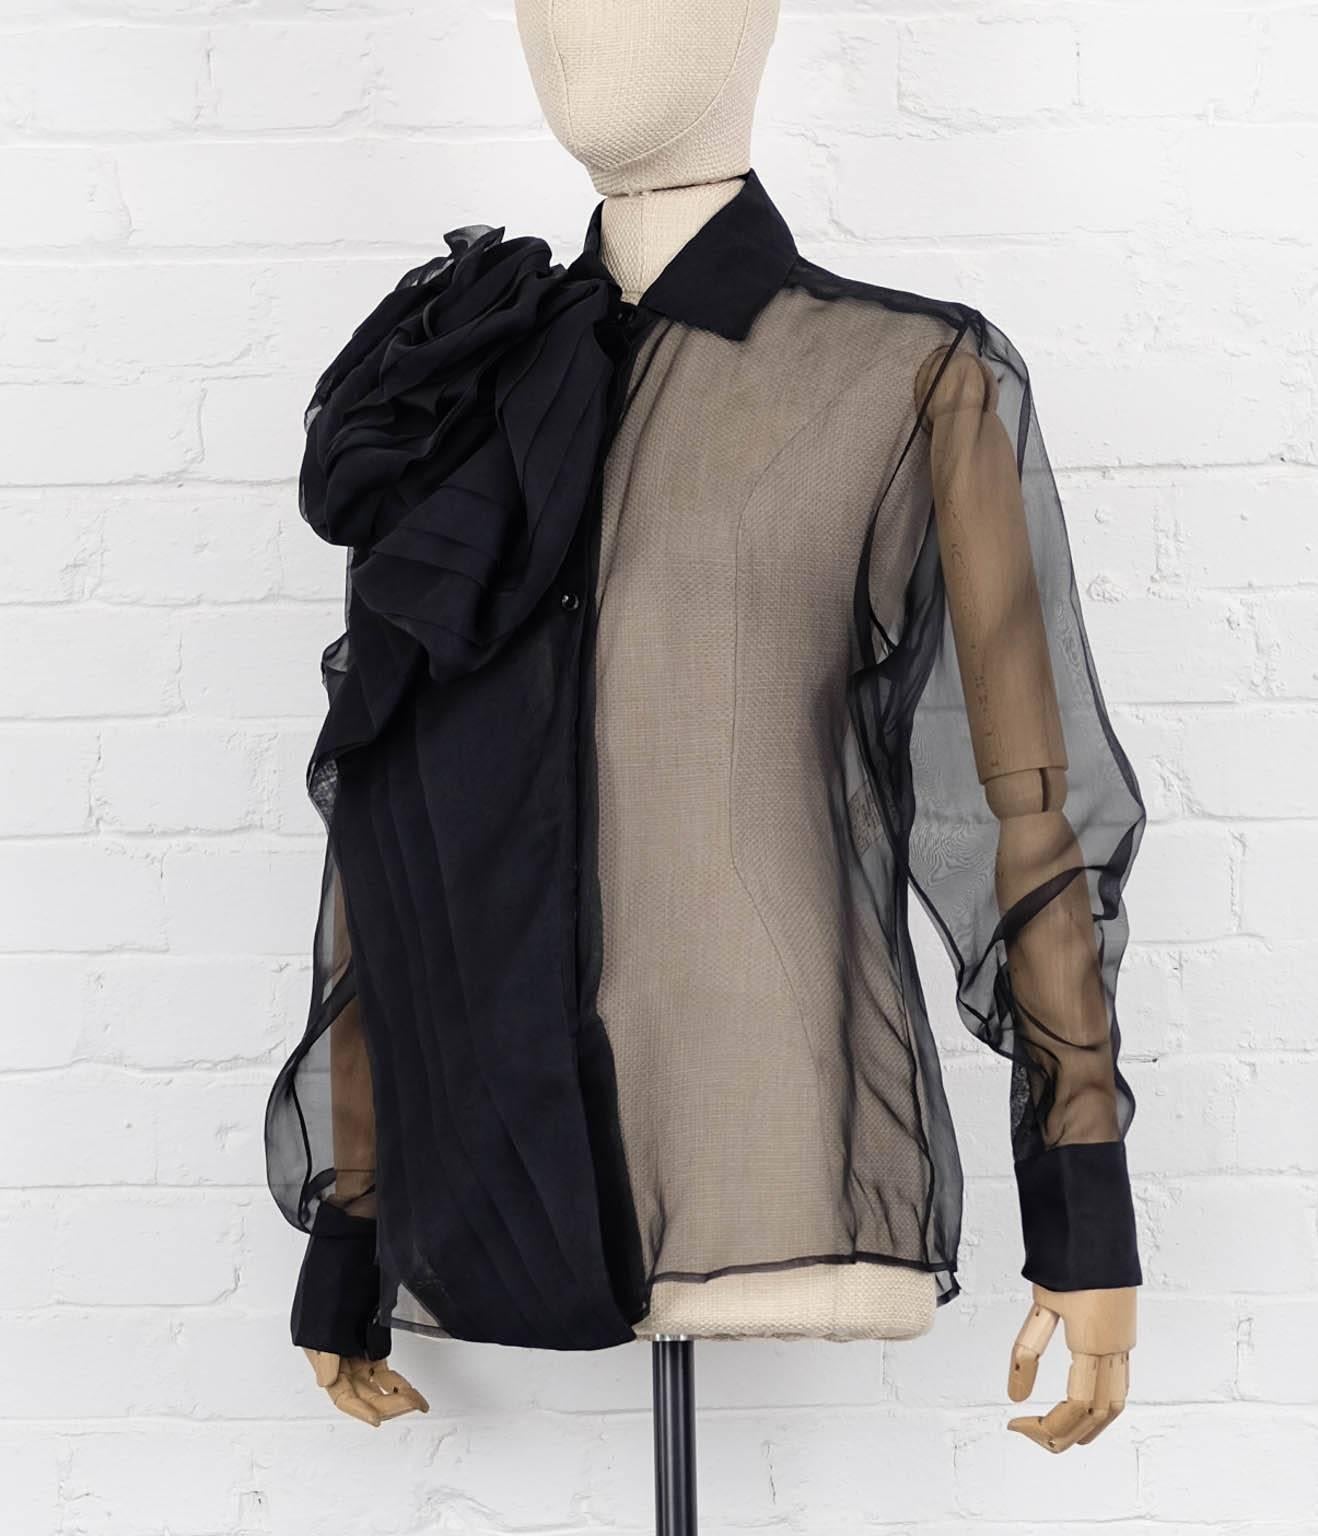 Circa 2004 CHRISTIAN DIOR by John Galliano black silk bow sheer blouse unworn In New Condition For Sale In London, GB